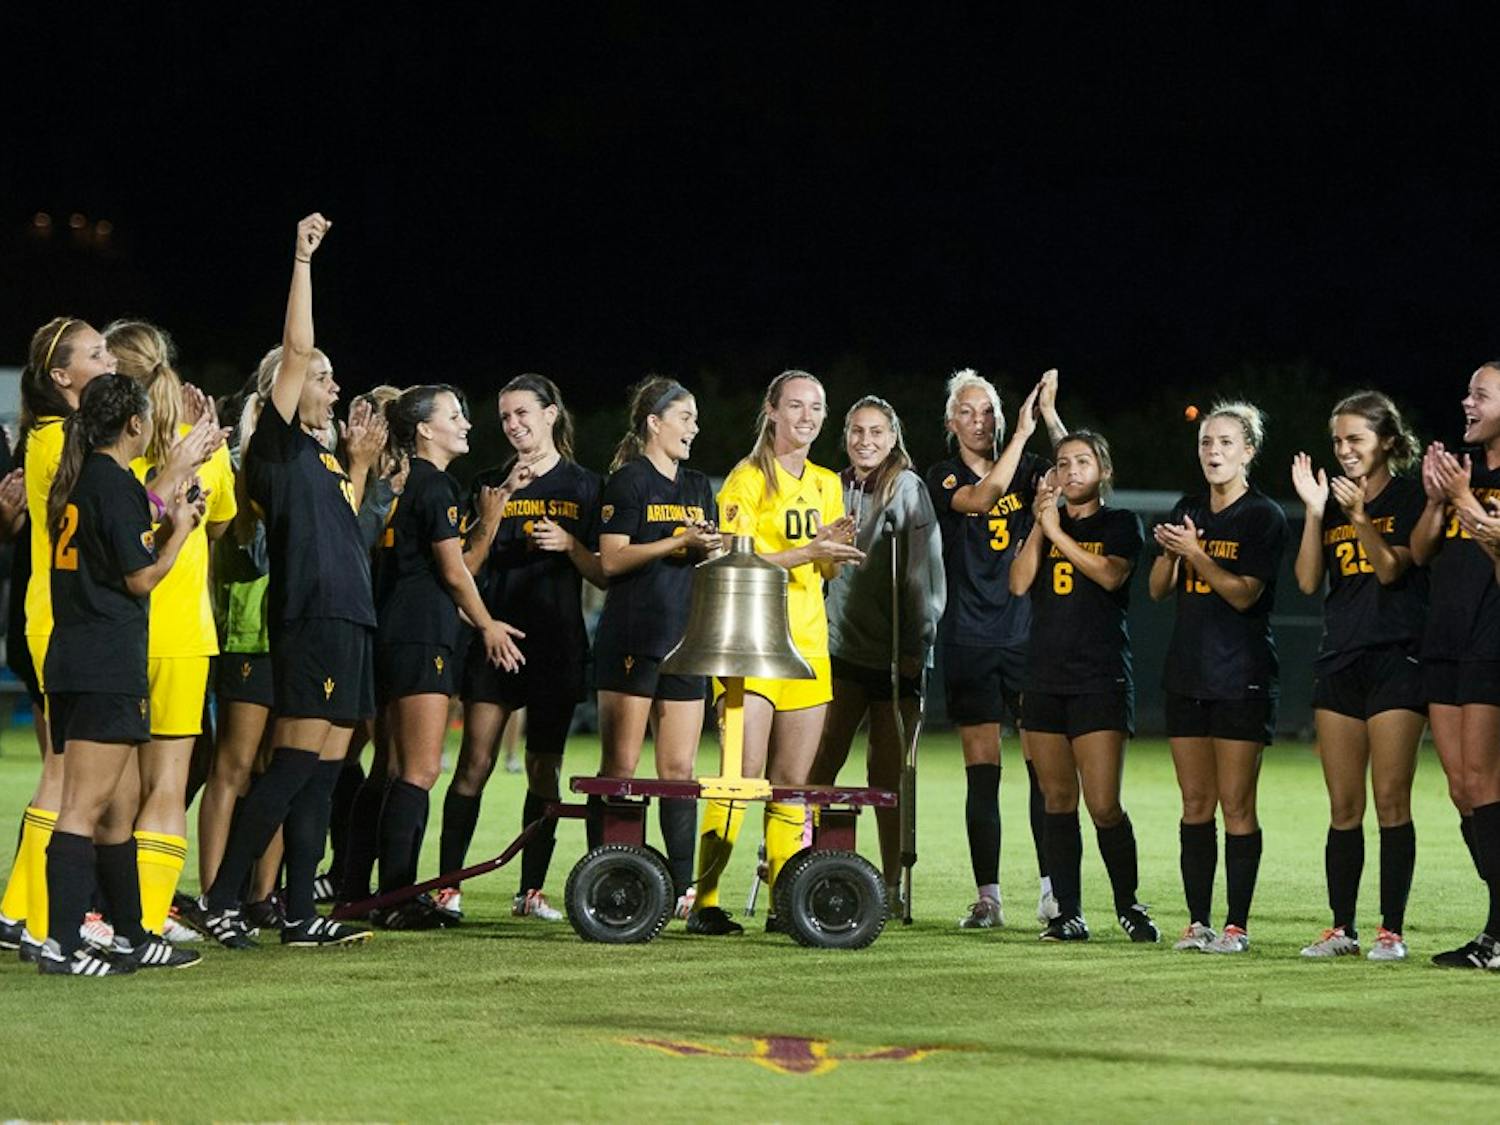 ASU's women's soccer team cheers for its win against Oregon State on Friday, Oct. 23, 2015, at Sun Devil Soccer Stadium in Tempe.